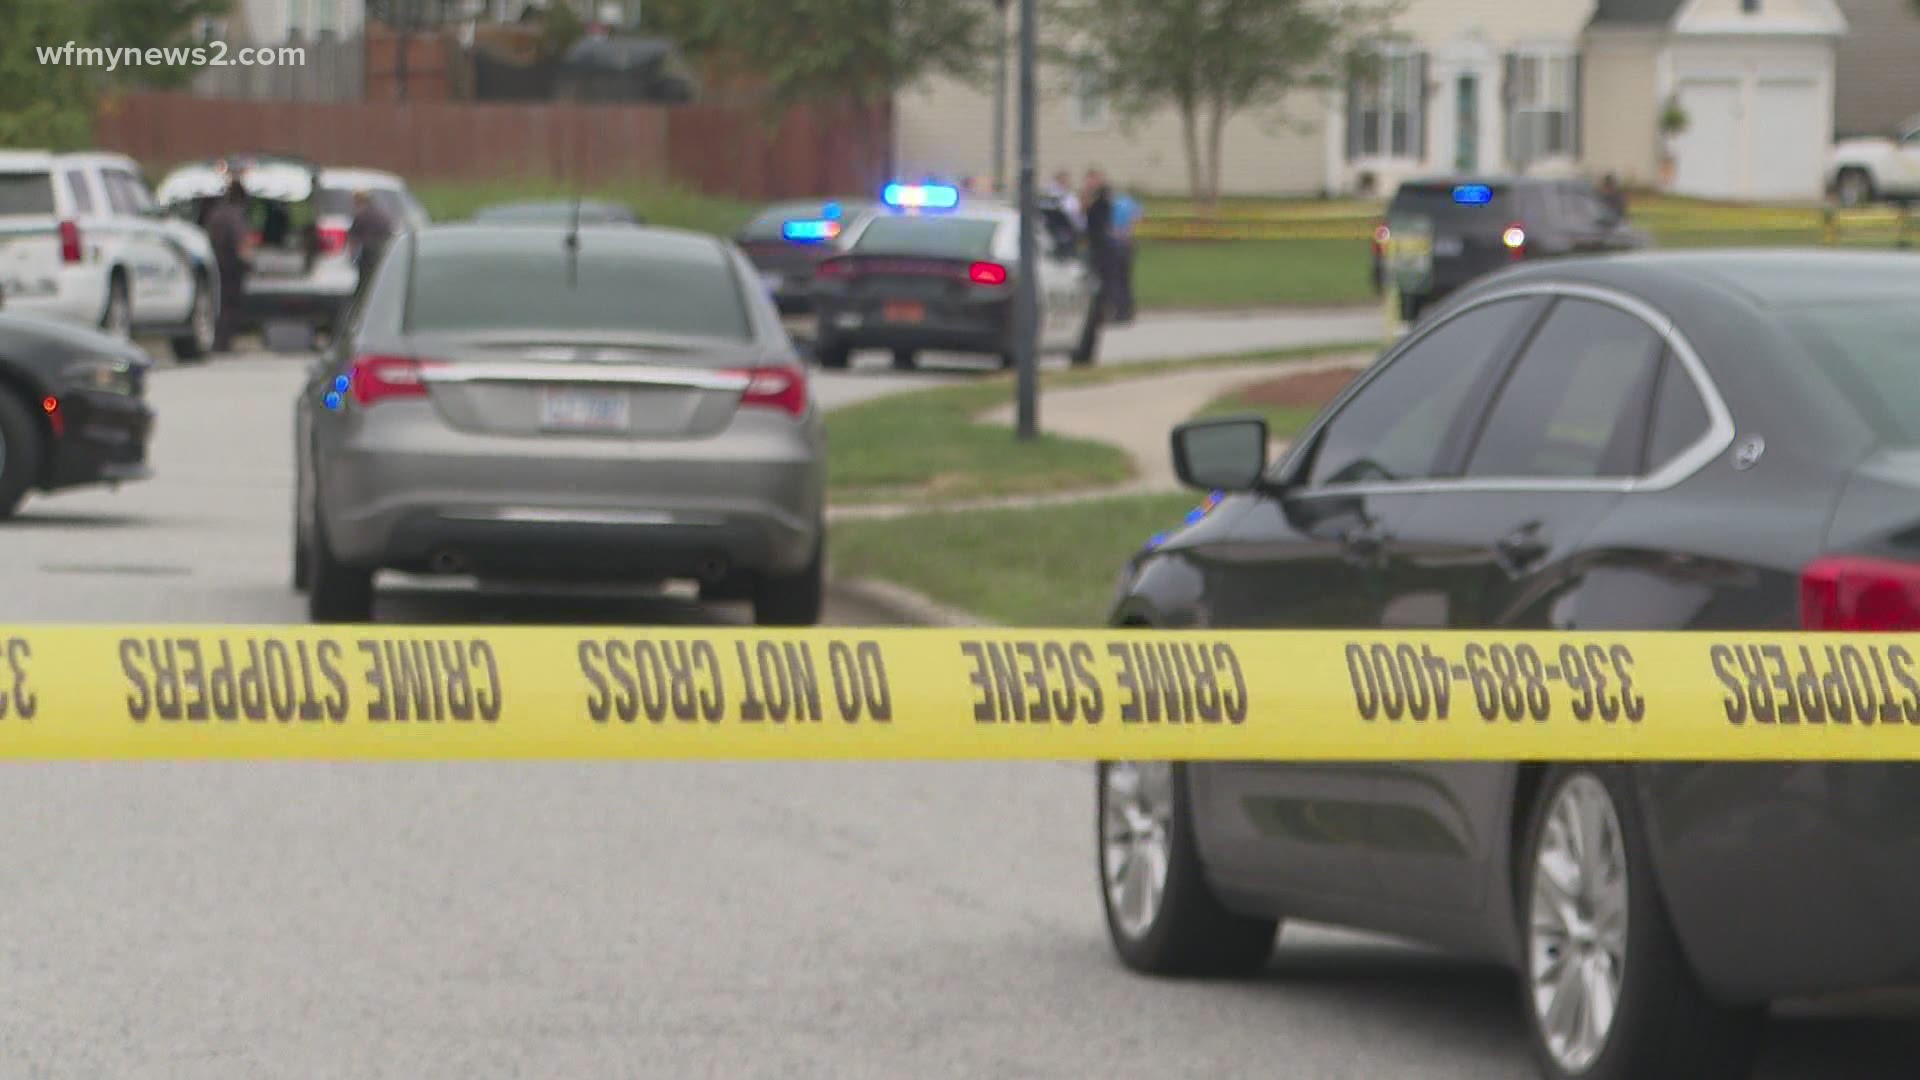 A High Point neighborhood was on lockdown after someone shot toward an officer. It all started with car break-ins.